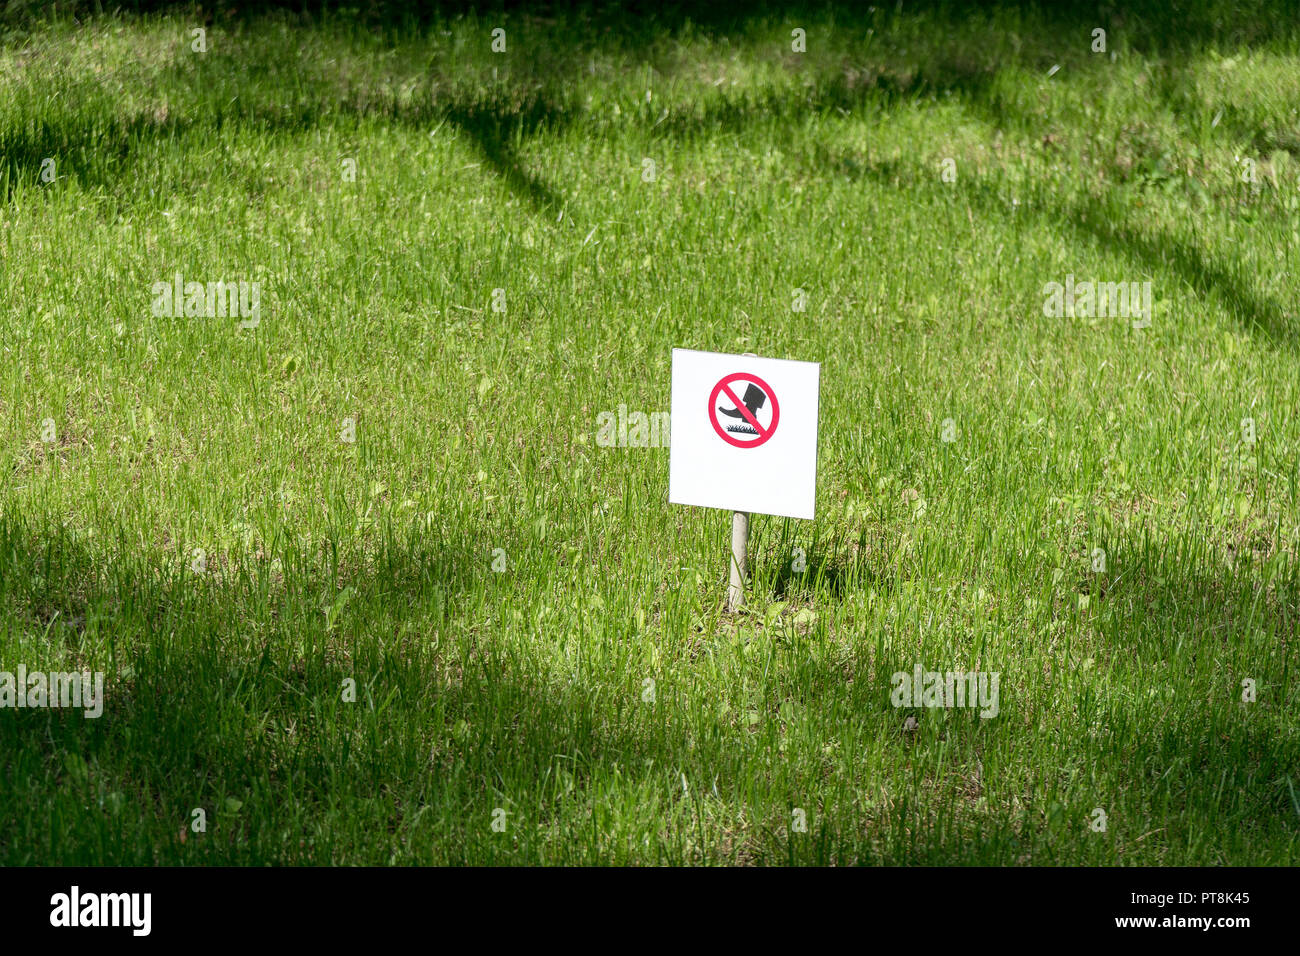 the symbol or sign of a ban is established in park and means the warning information that on lawns not to go. Stock Photo